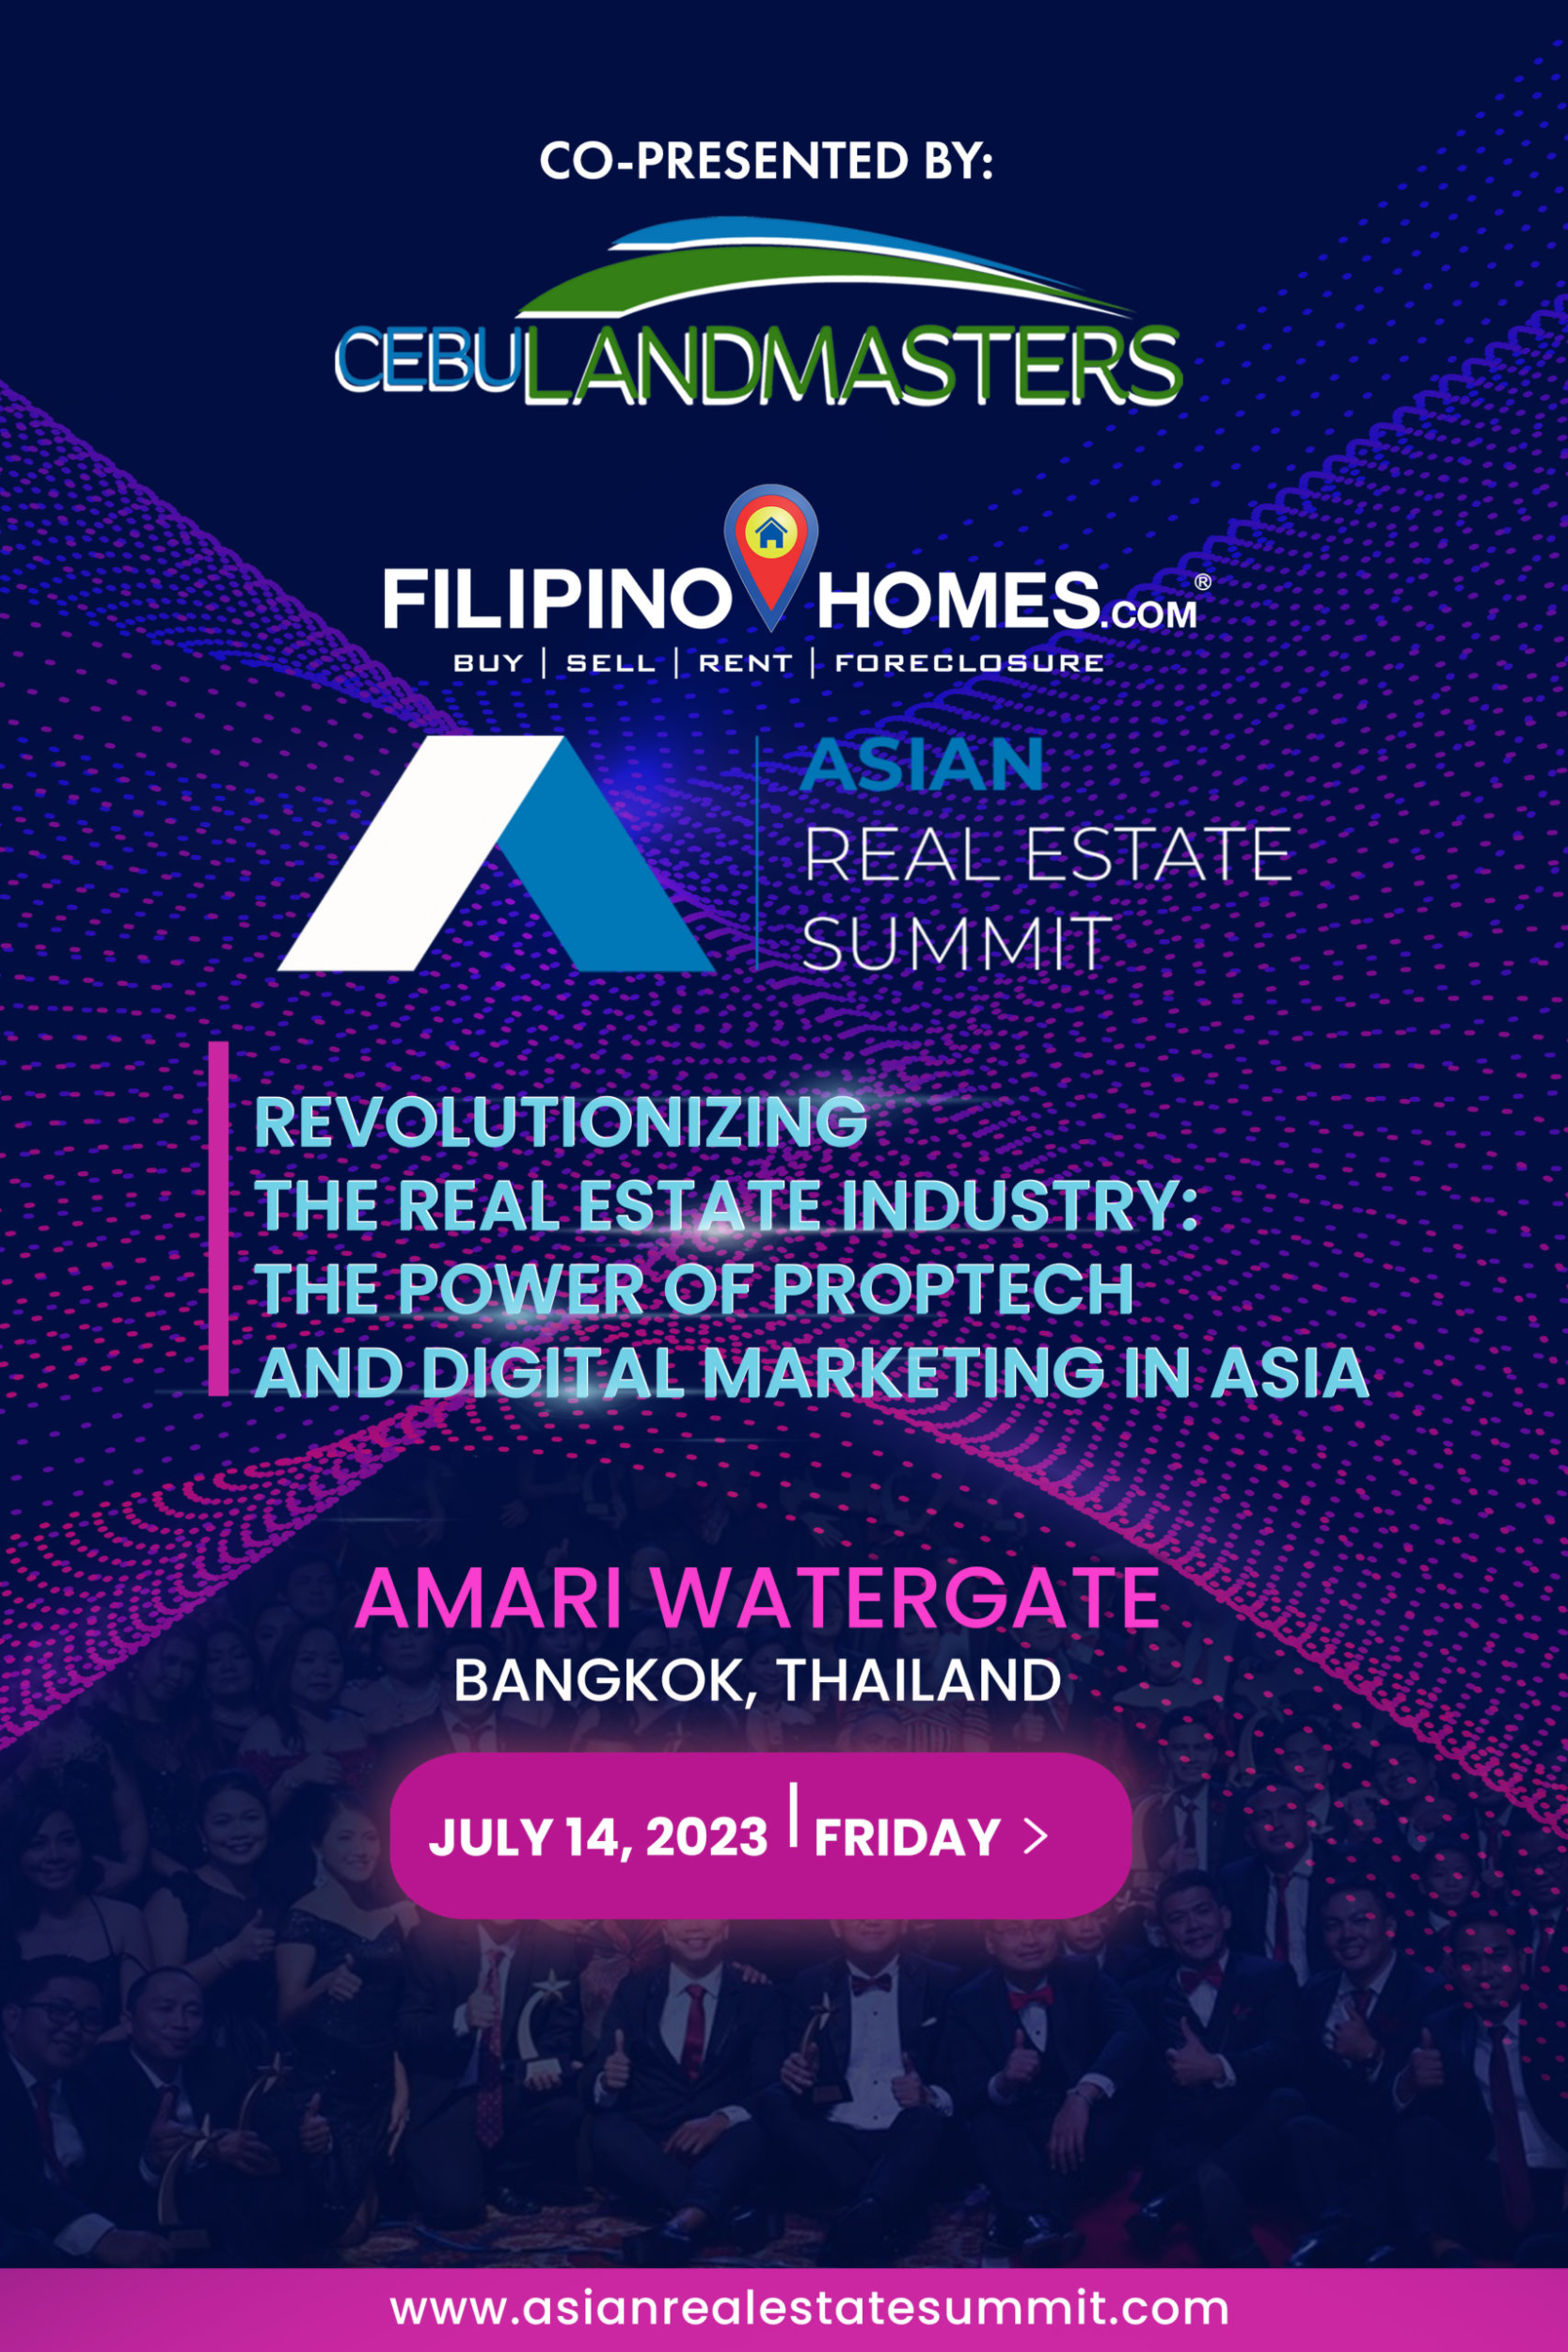 ARES 2023: Transforming the Real Estate Industry in Asia through PropTech and Digital Marketing